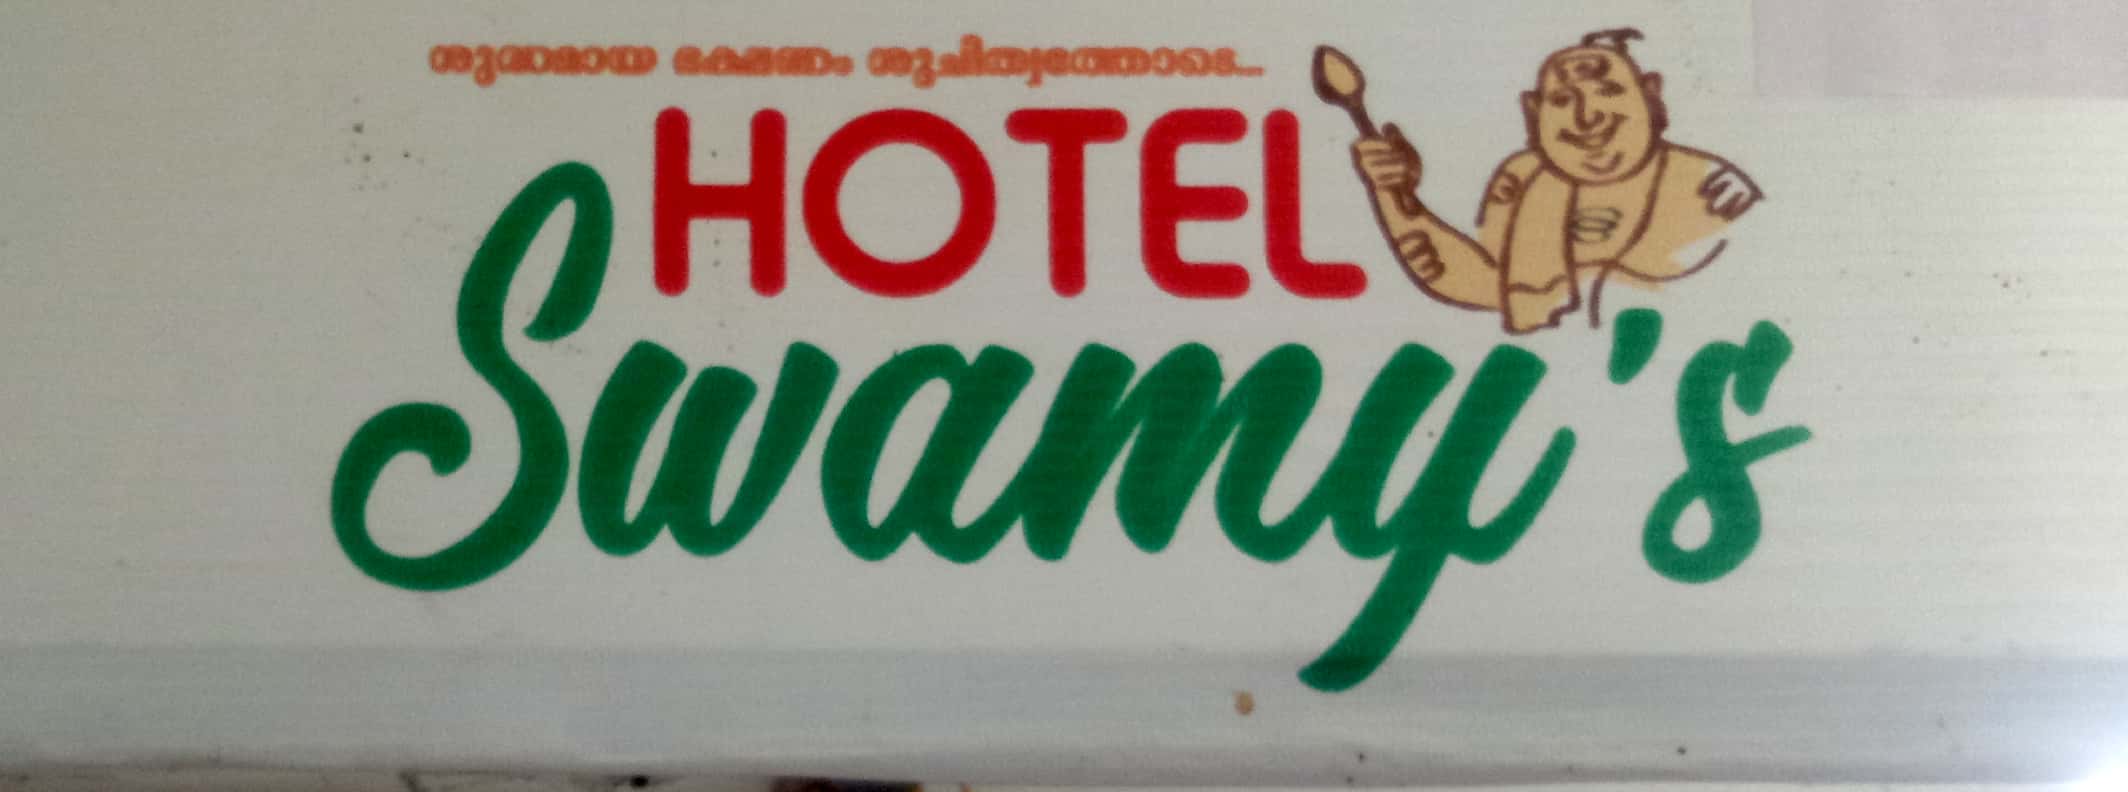 HOTEL SWAMYS CHALAKUDY, VEGETARIAN,  service in Chalakudy, Thrissur